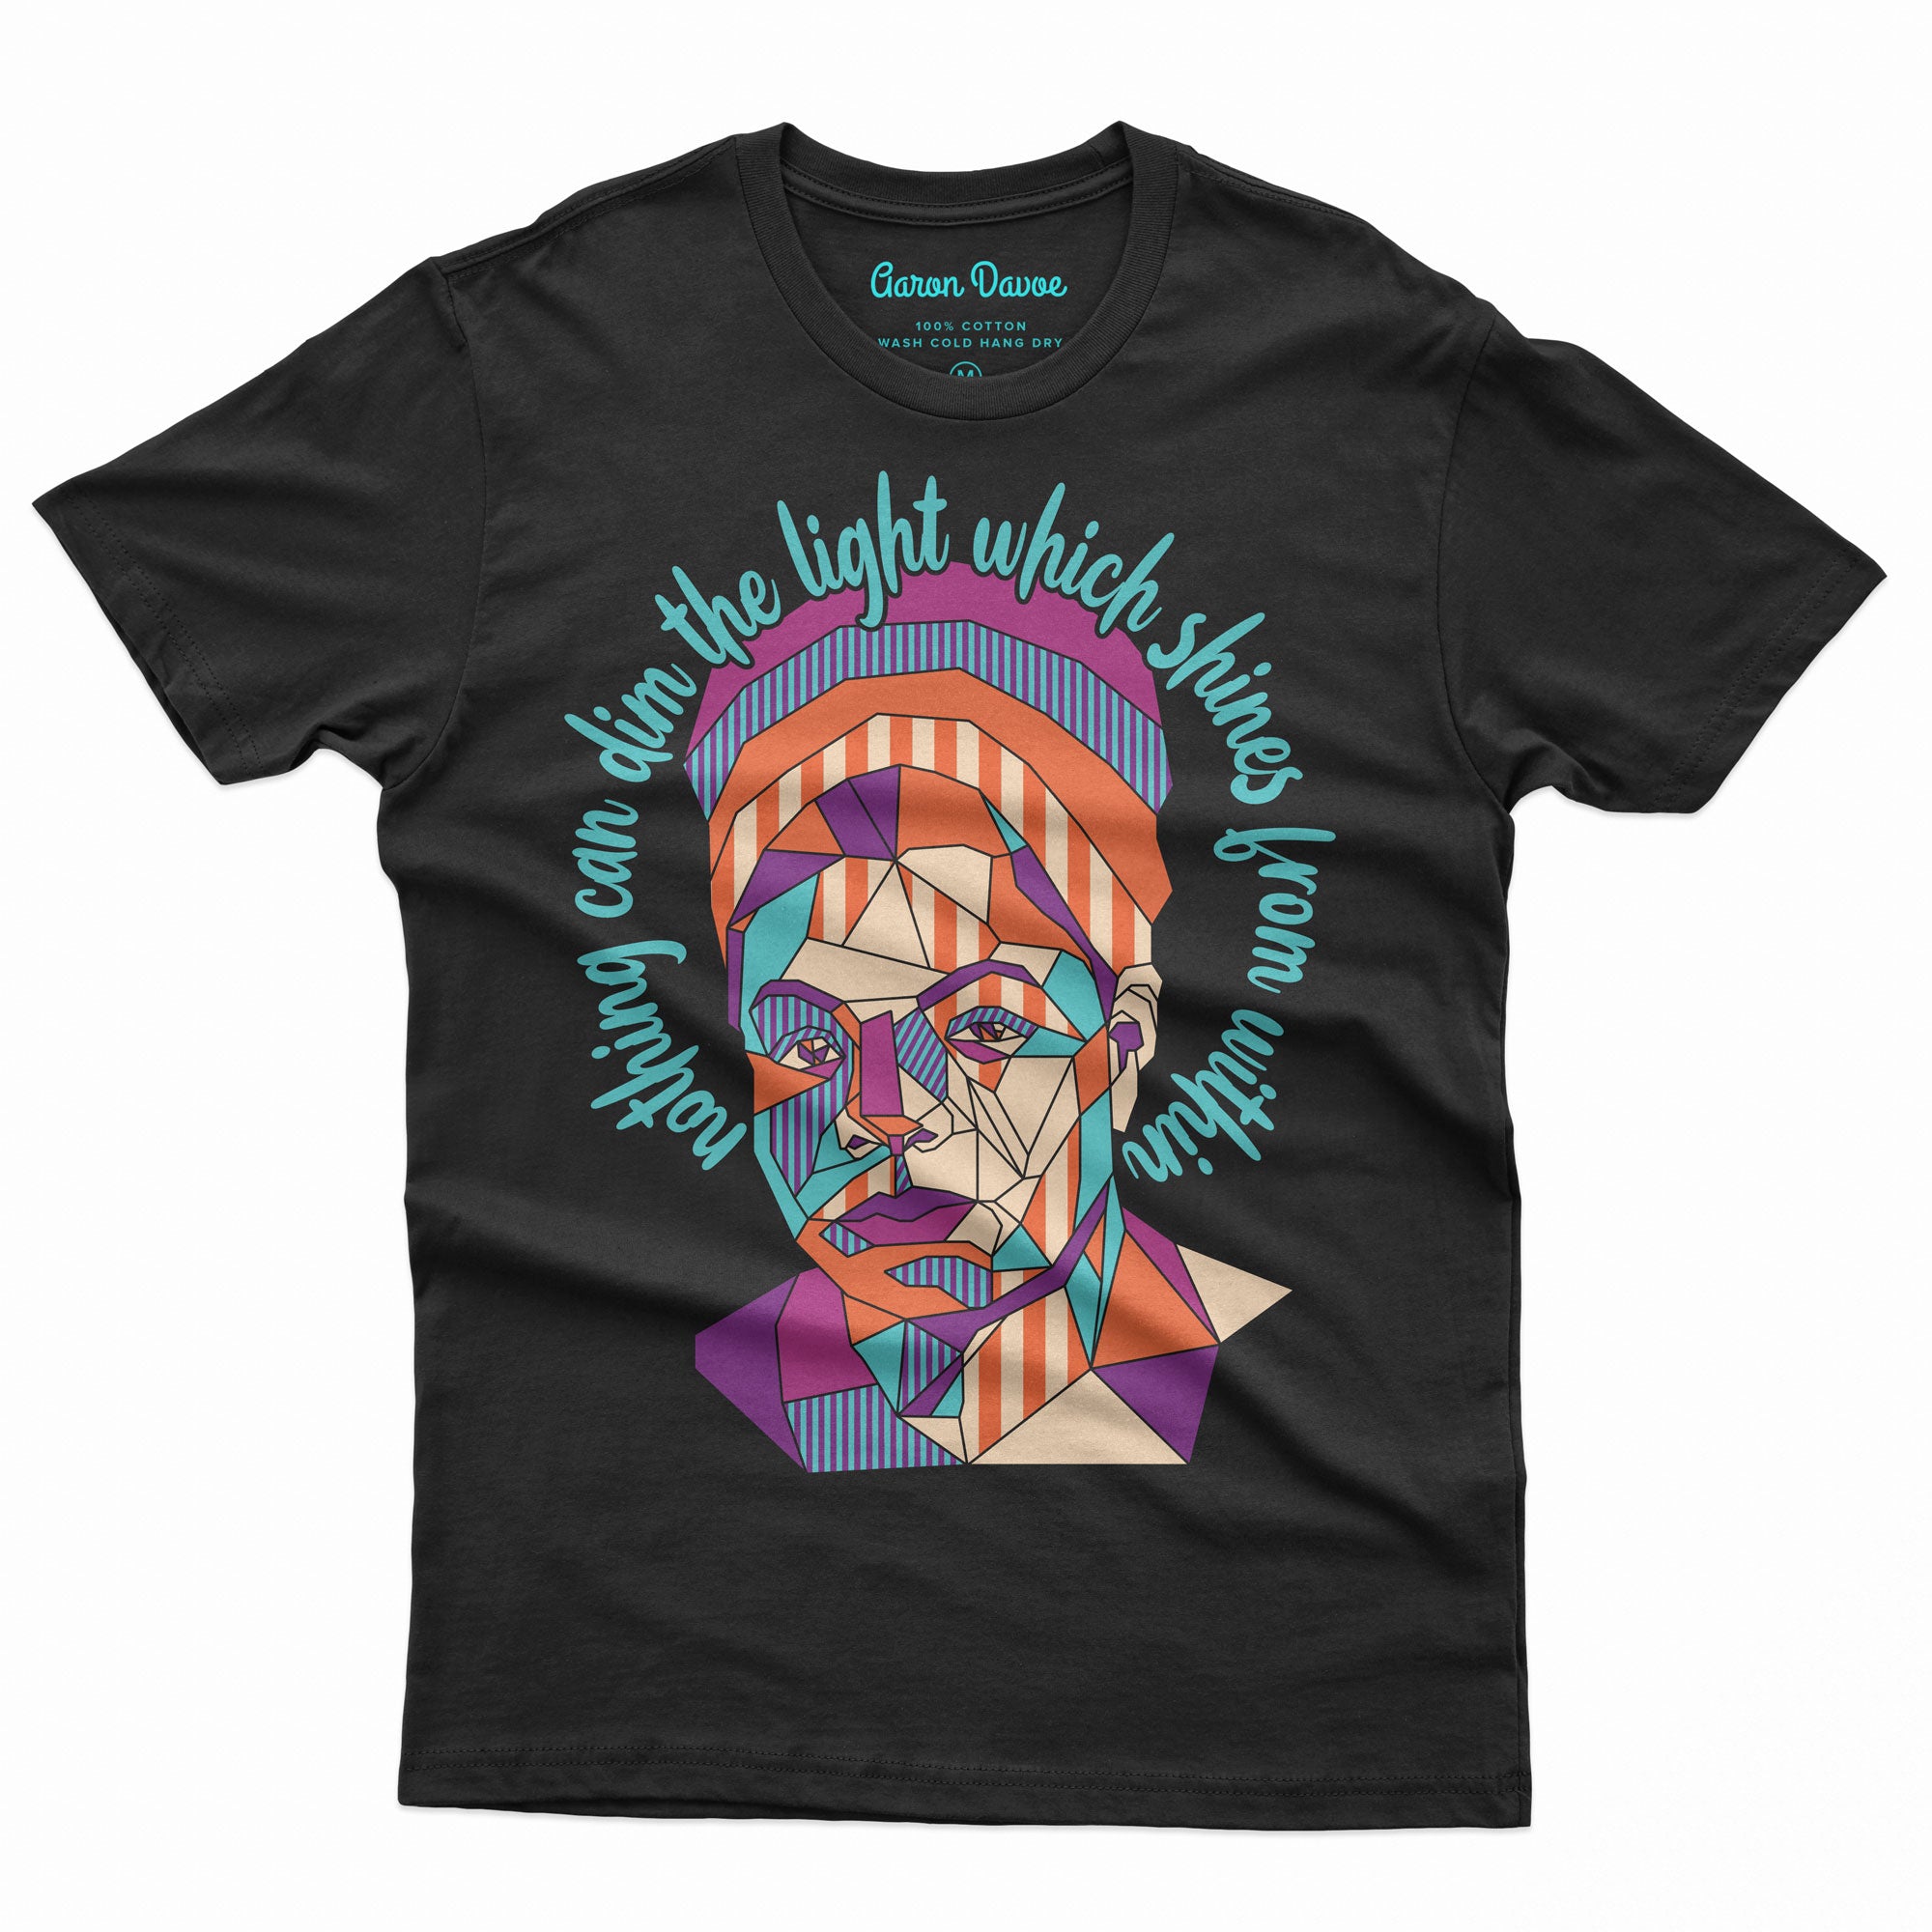 Maya Angelou - Nothing Can Dim The Light Which Shines From Within freeshipping - Aarondavoe